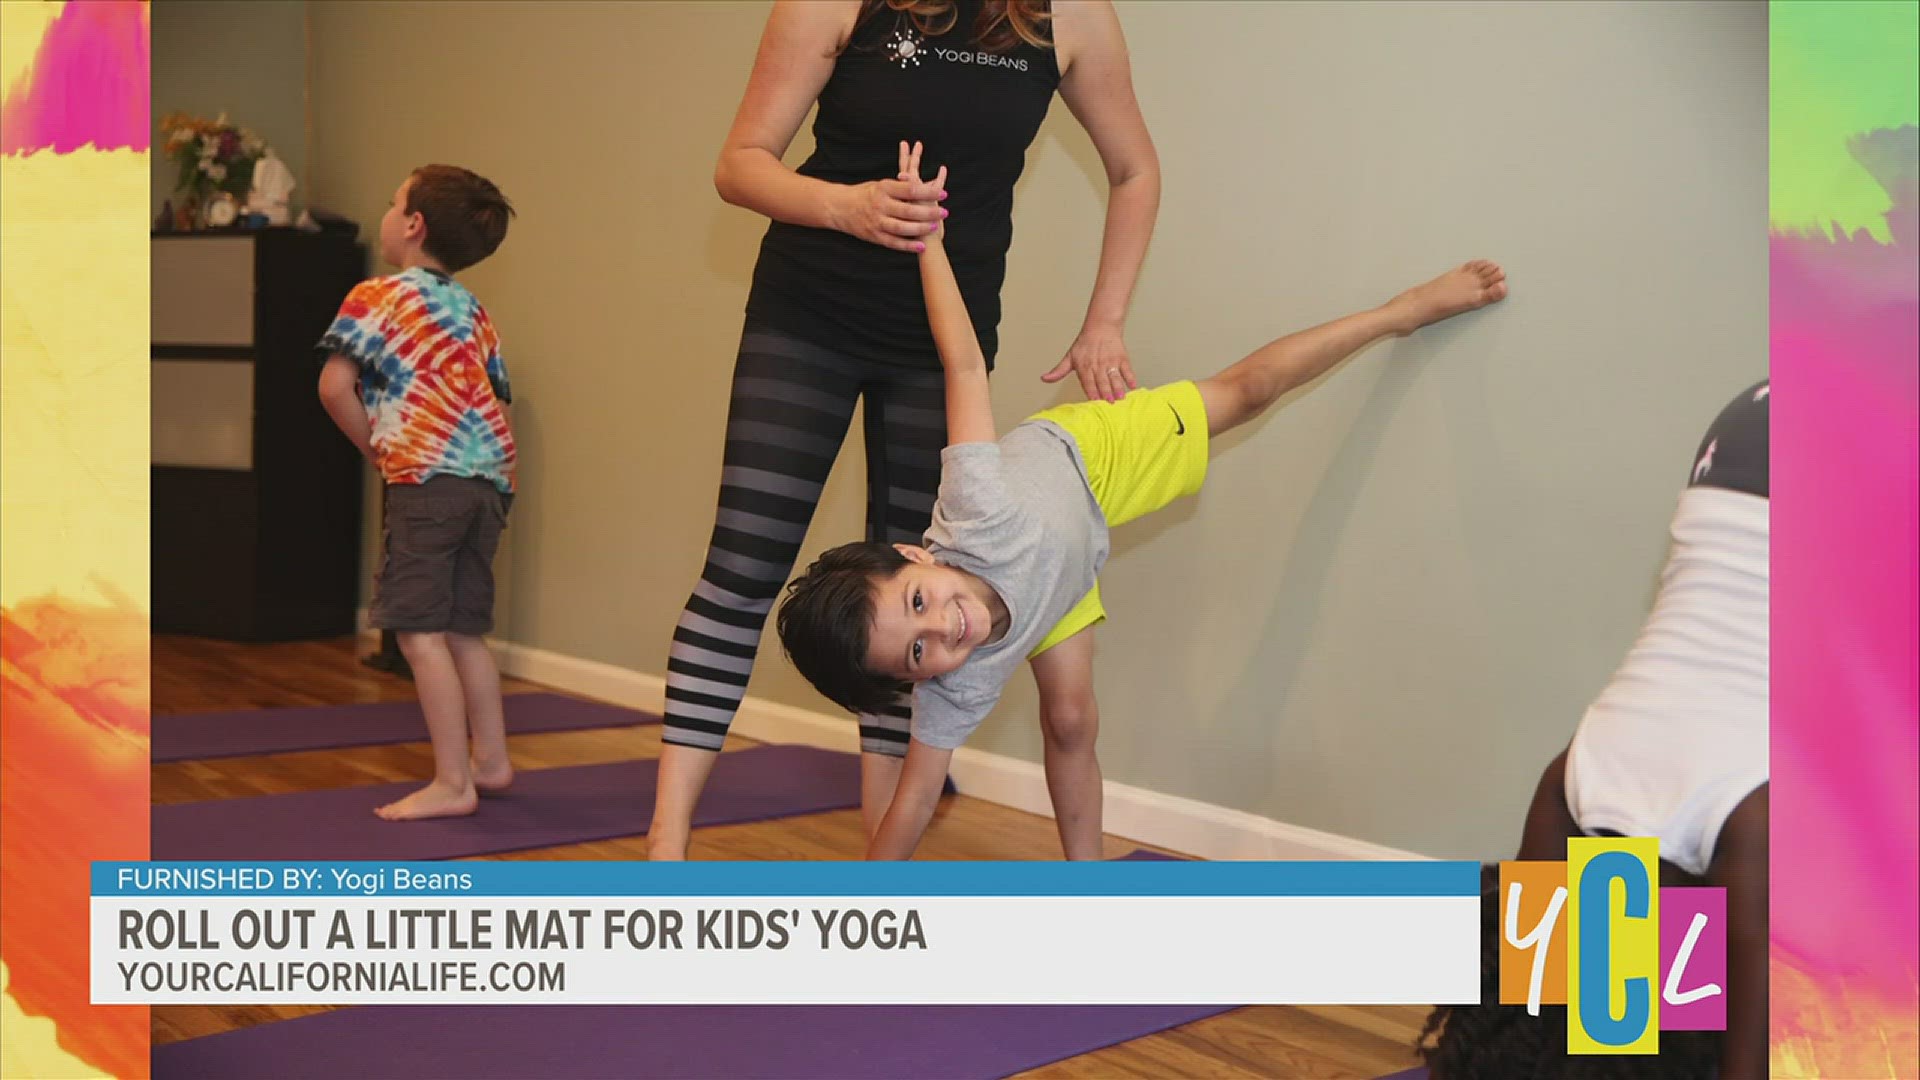 Lauren Chaitoff, founder of Yogi Beans and author of "108 Awesome Yoga Poses For Kids" talks about the benefits of yoga for kids and where to start.